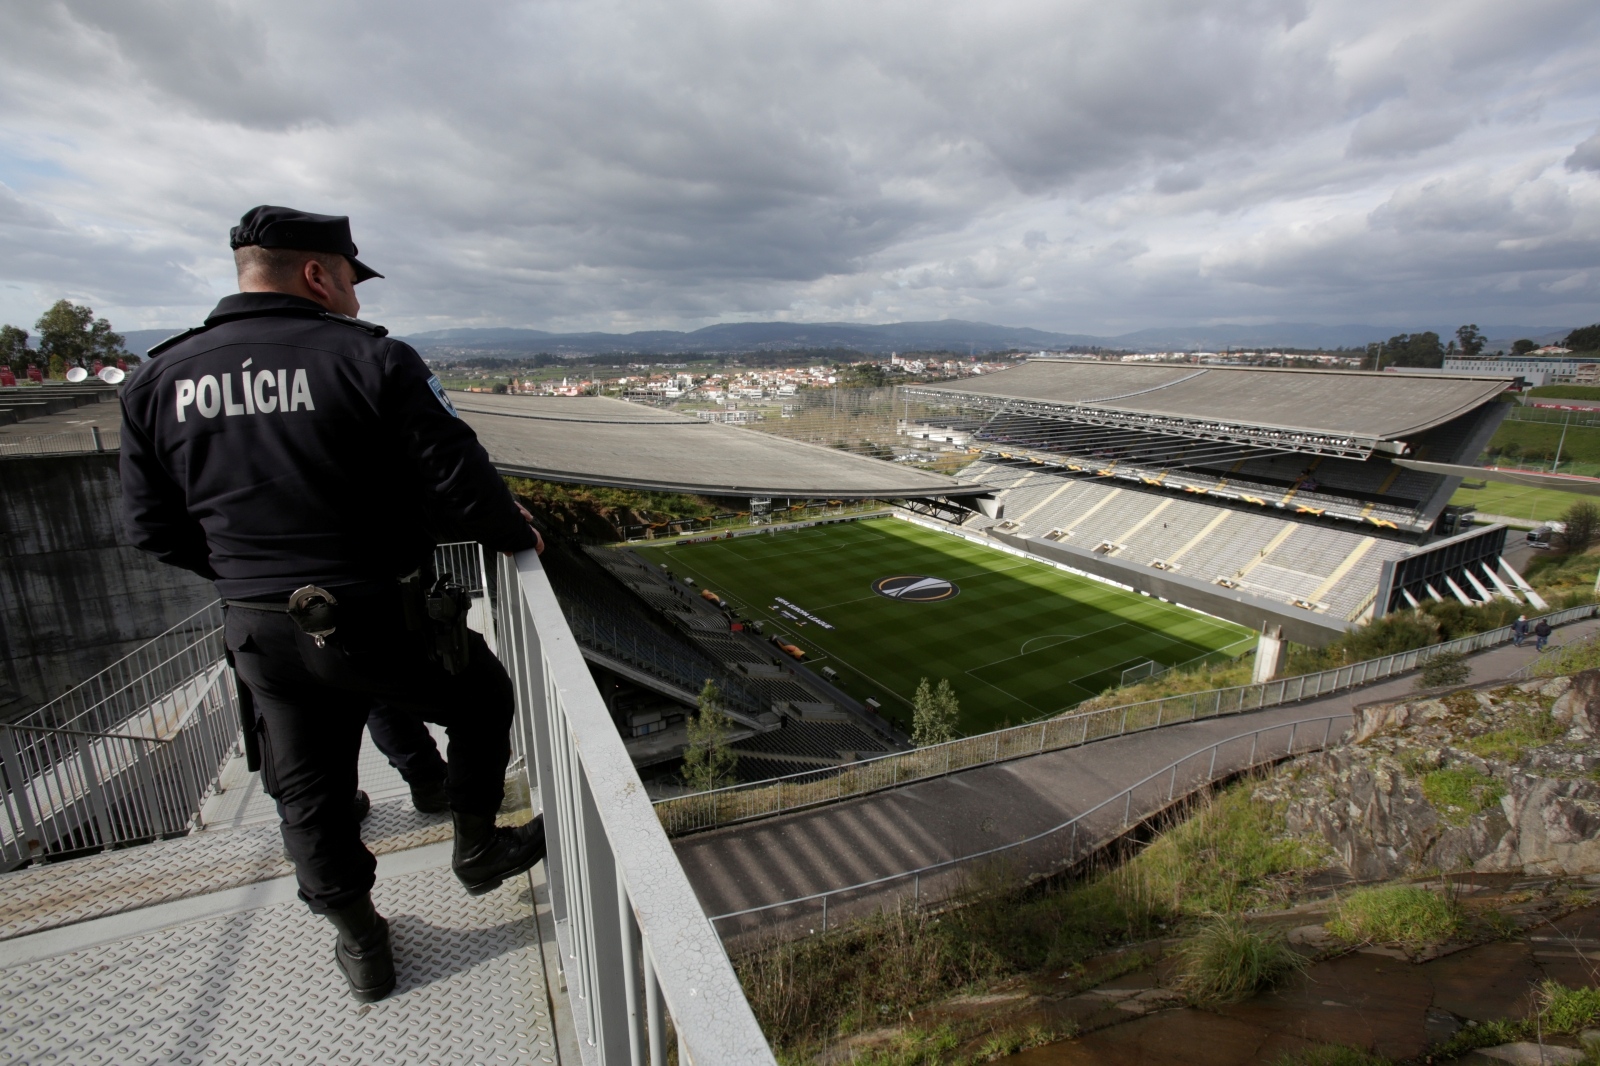 Europa League - Round of 32 Second Leg - S.C. Braga v Rangers Soccer Football - Europa League - Round of 32 Second Leg - S.C. Braga v Rangers - Estadio Municipal de Braga, Braga, Portugal - February 26, 2020  A police officer looks over the stadium before the match  REUTERS/Miguel Vidal MIGUEL VIDAL